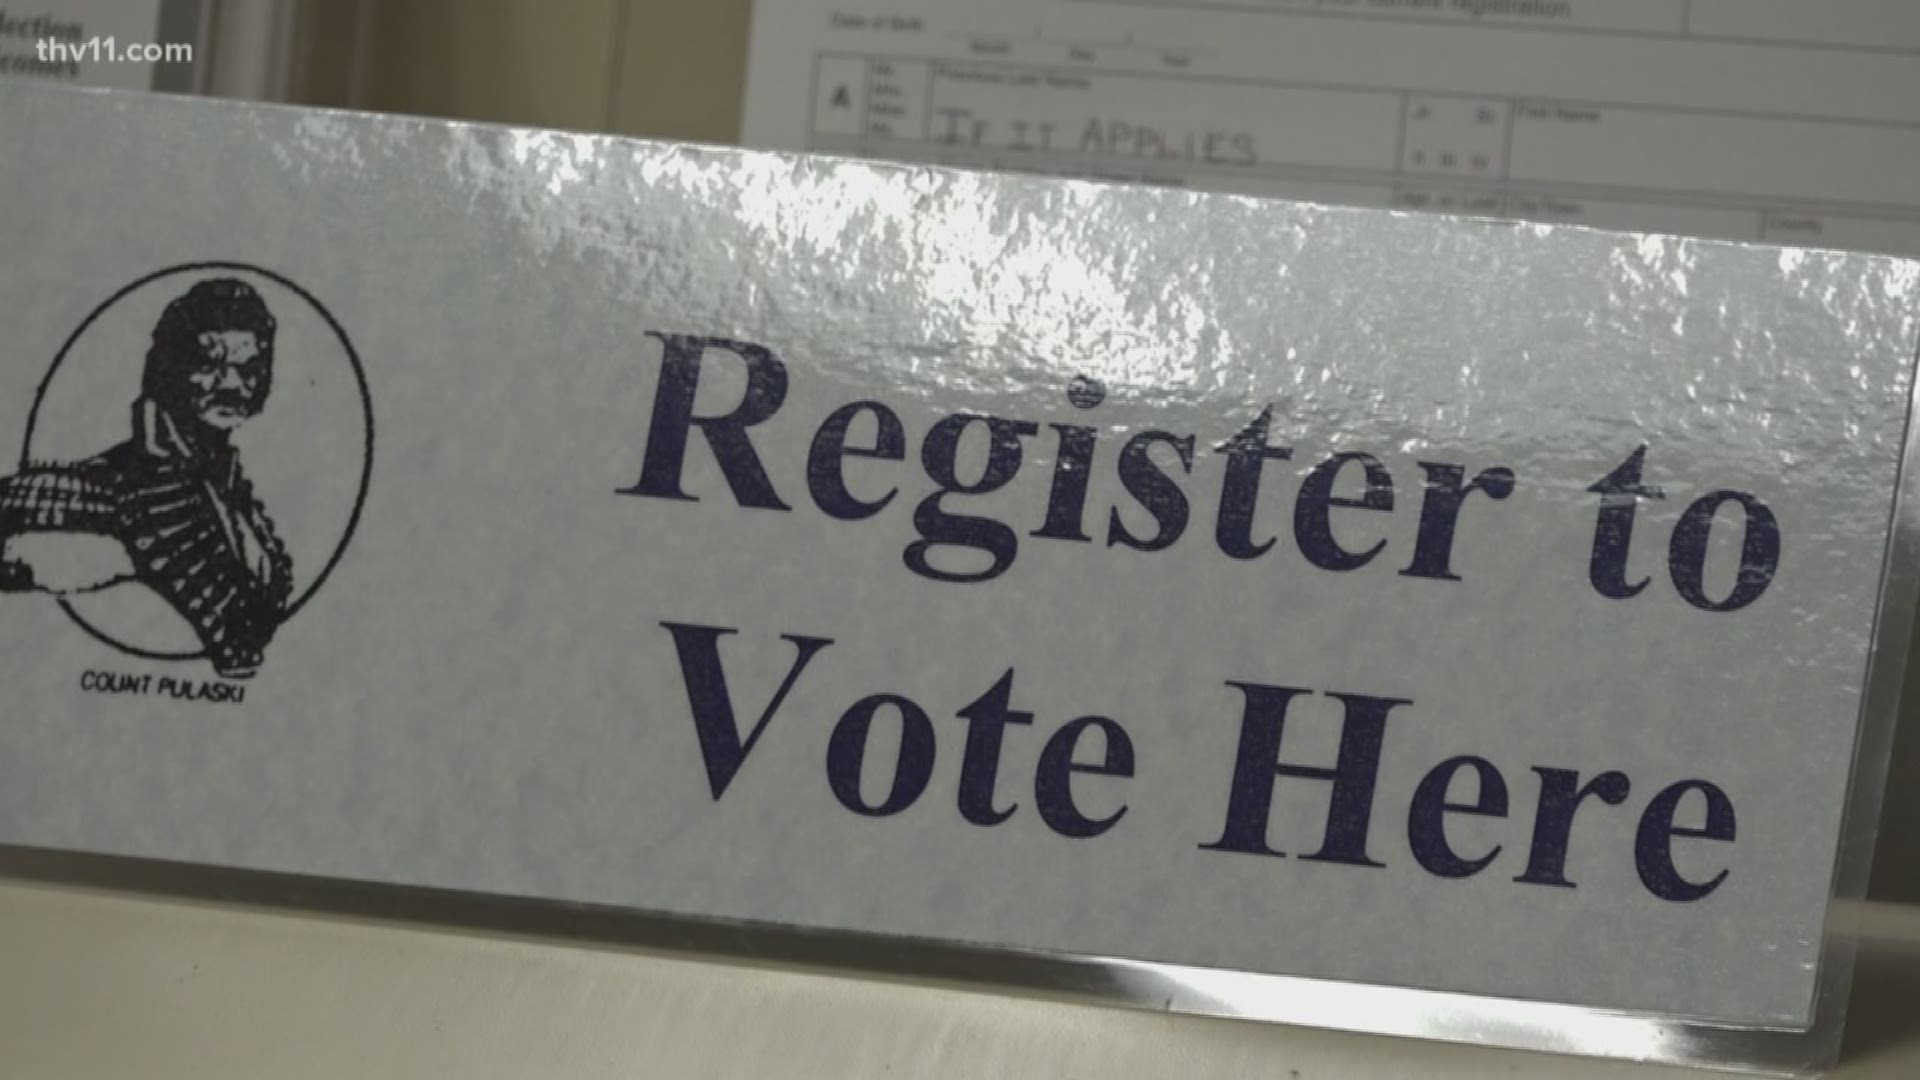 Several elections are coming up, and if you want to be able to vote, you need to make sure you are registered.